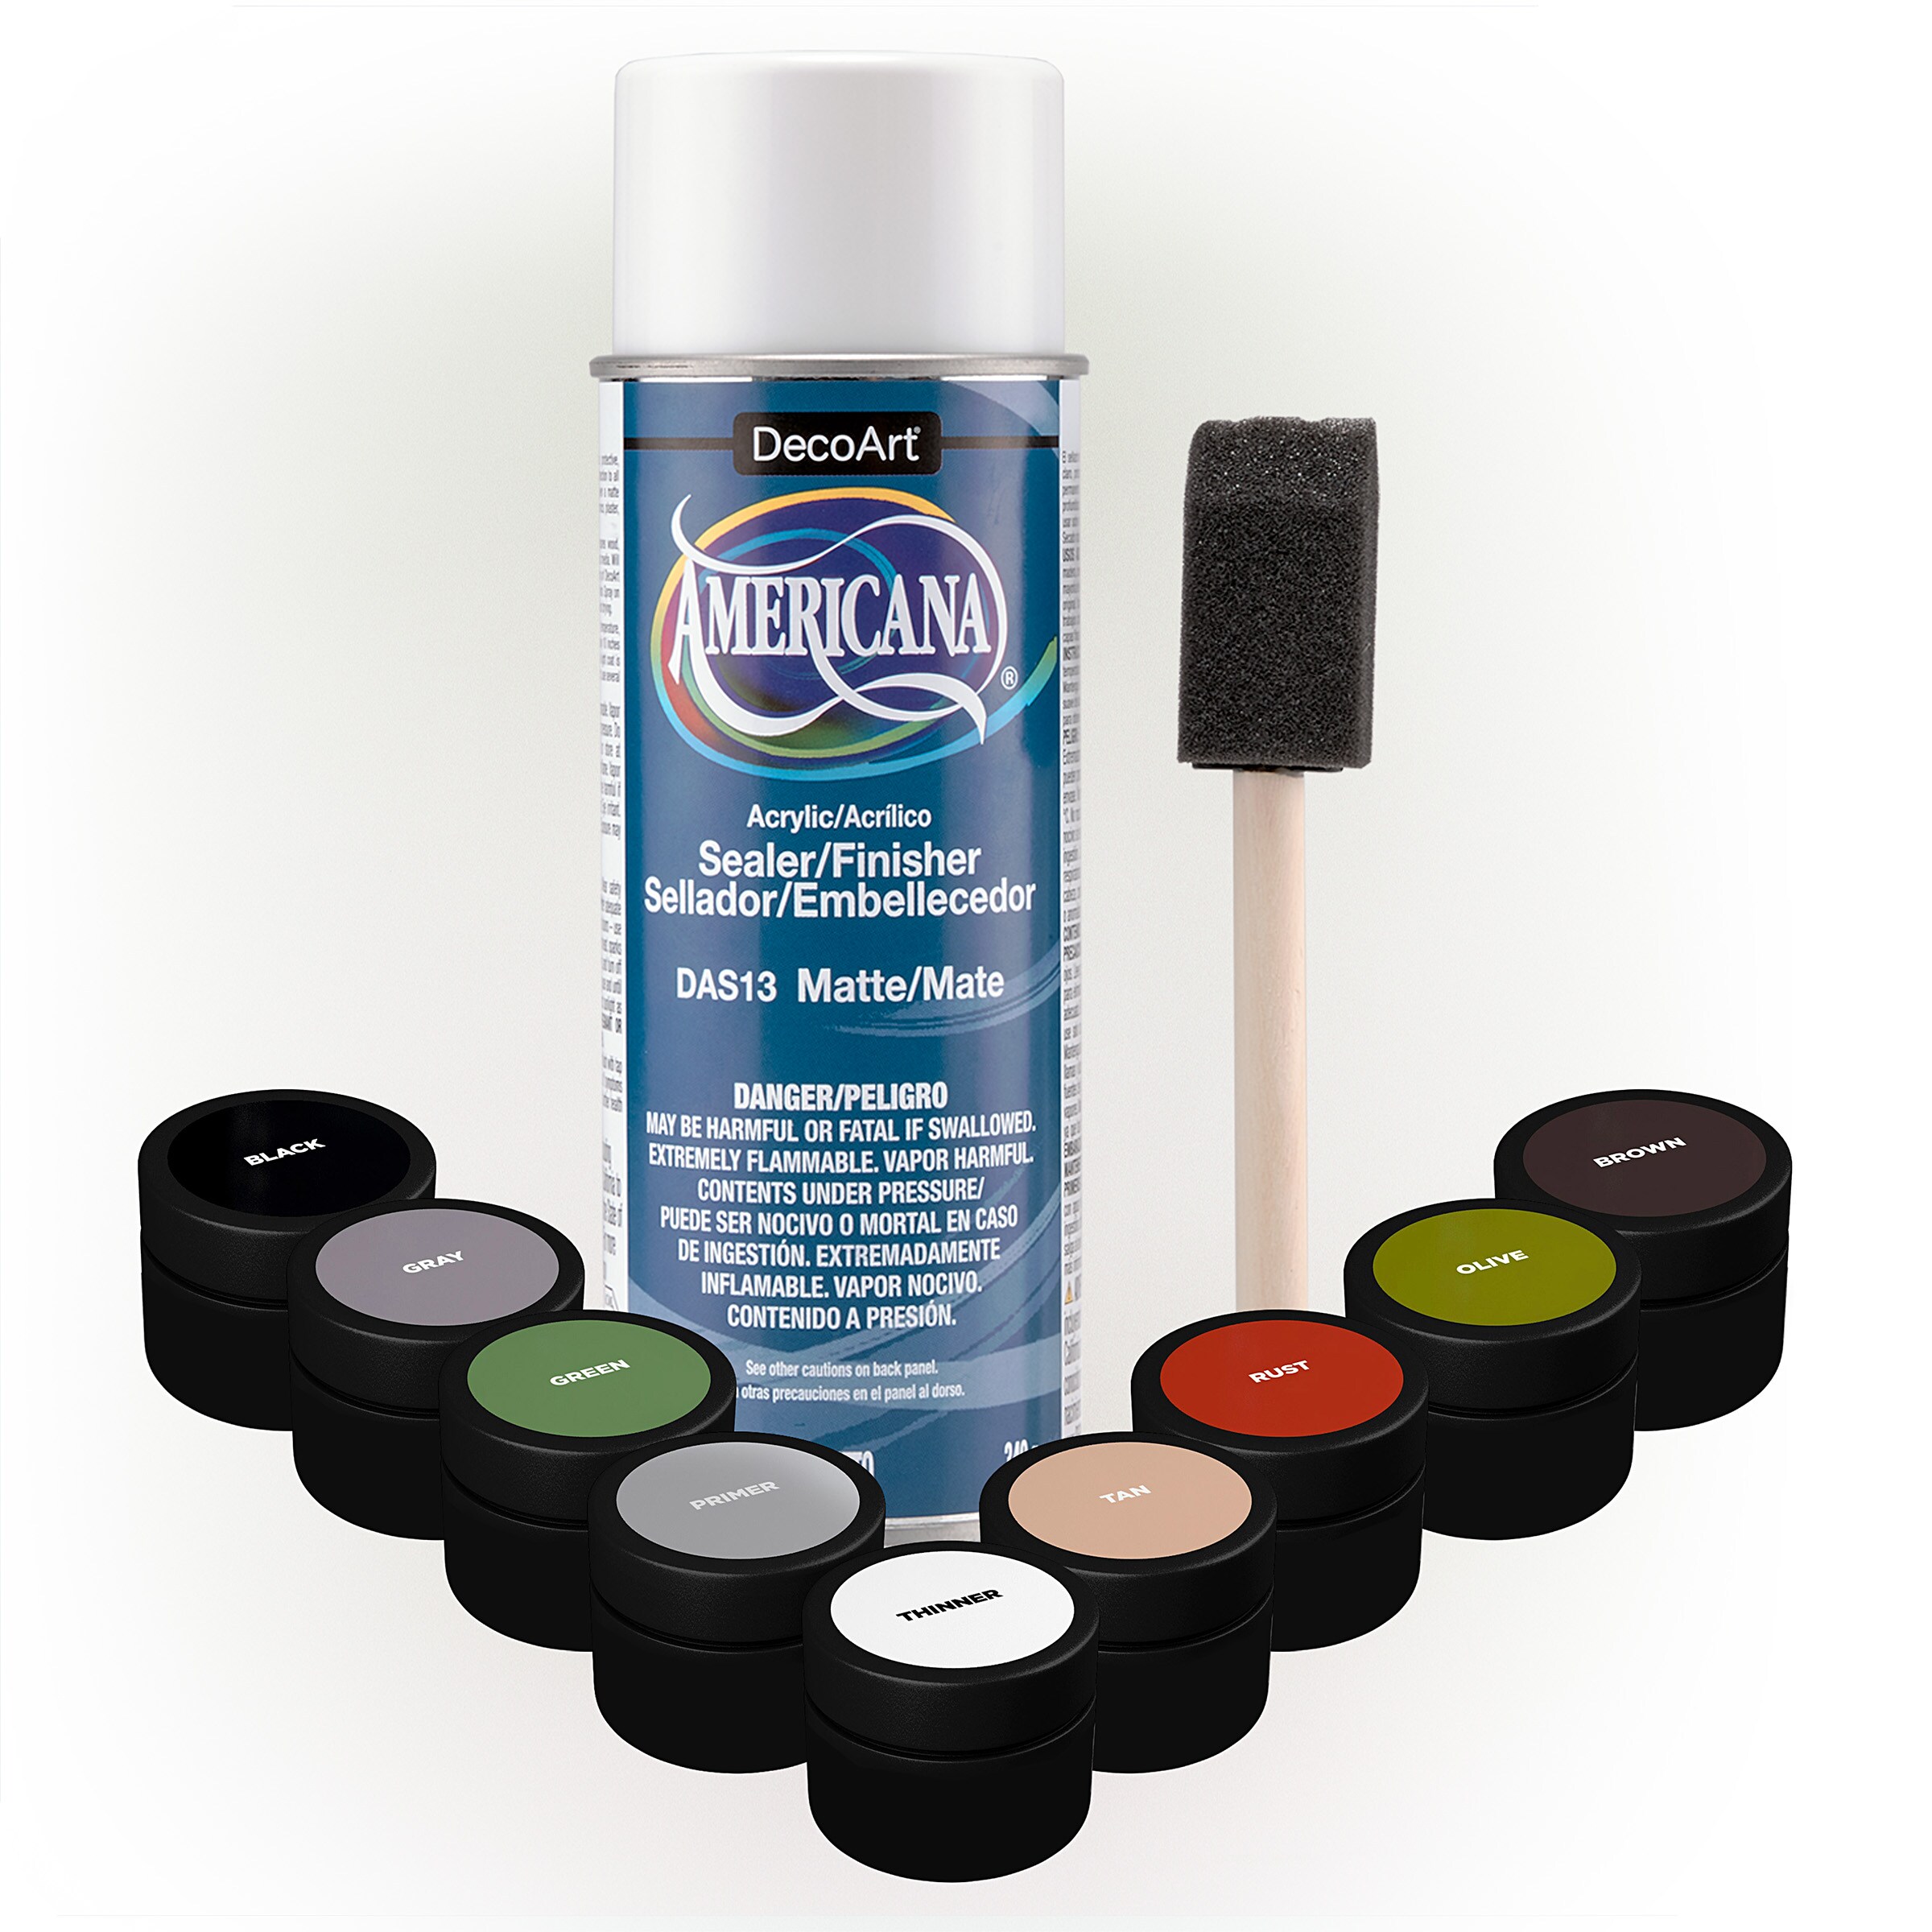 Touch Up™ Ultimate Combo – Touch Up Cup